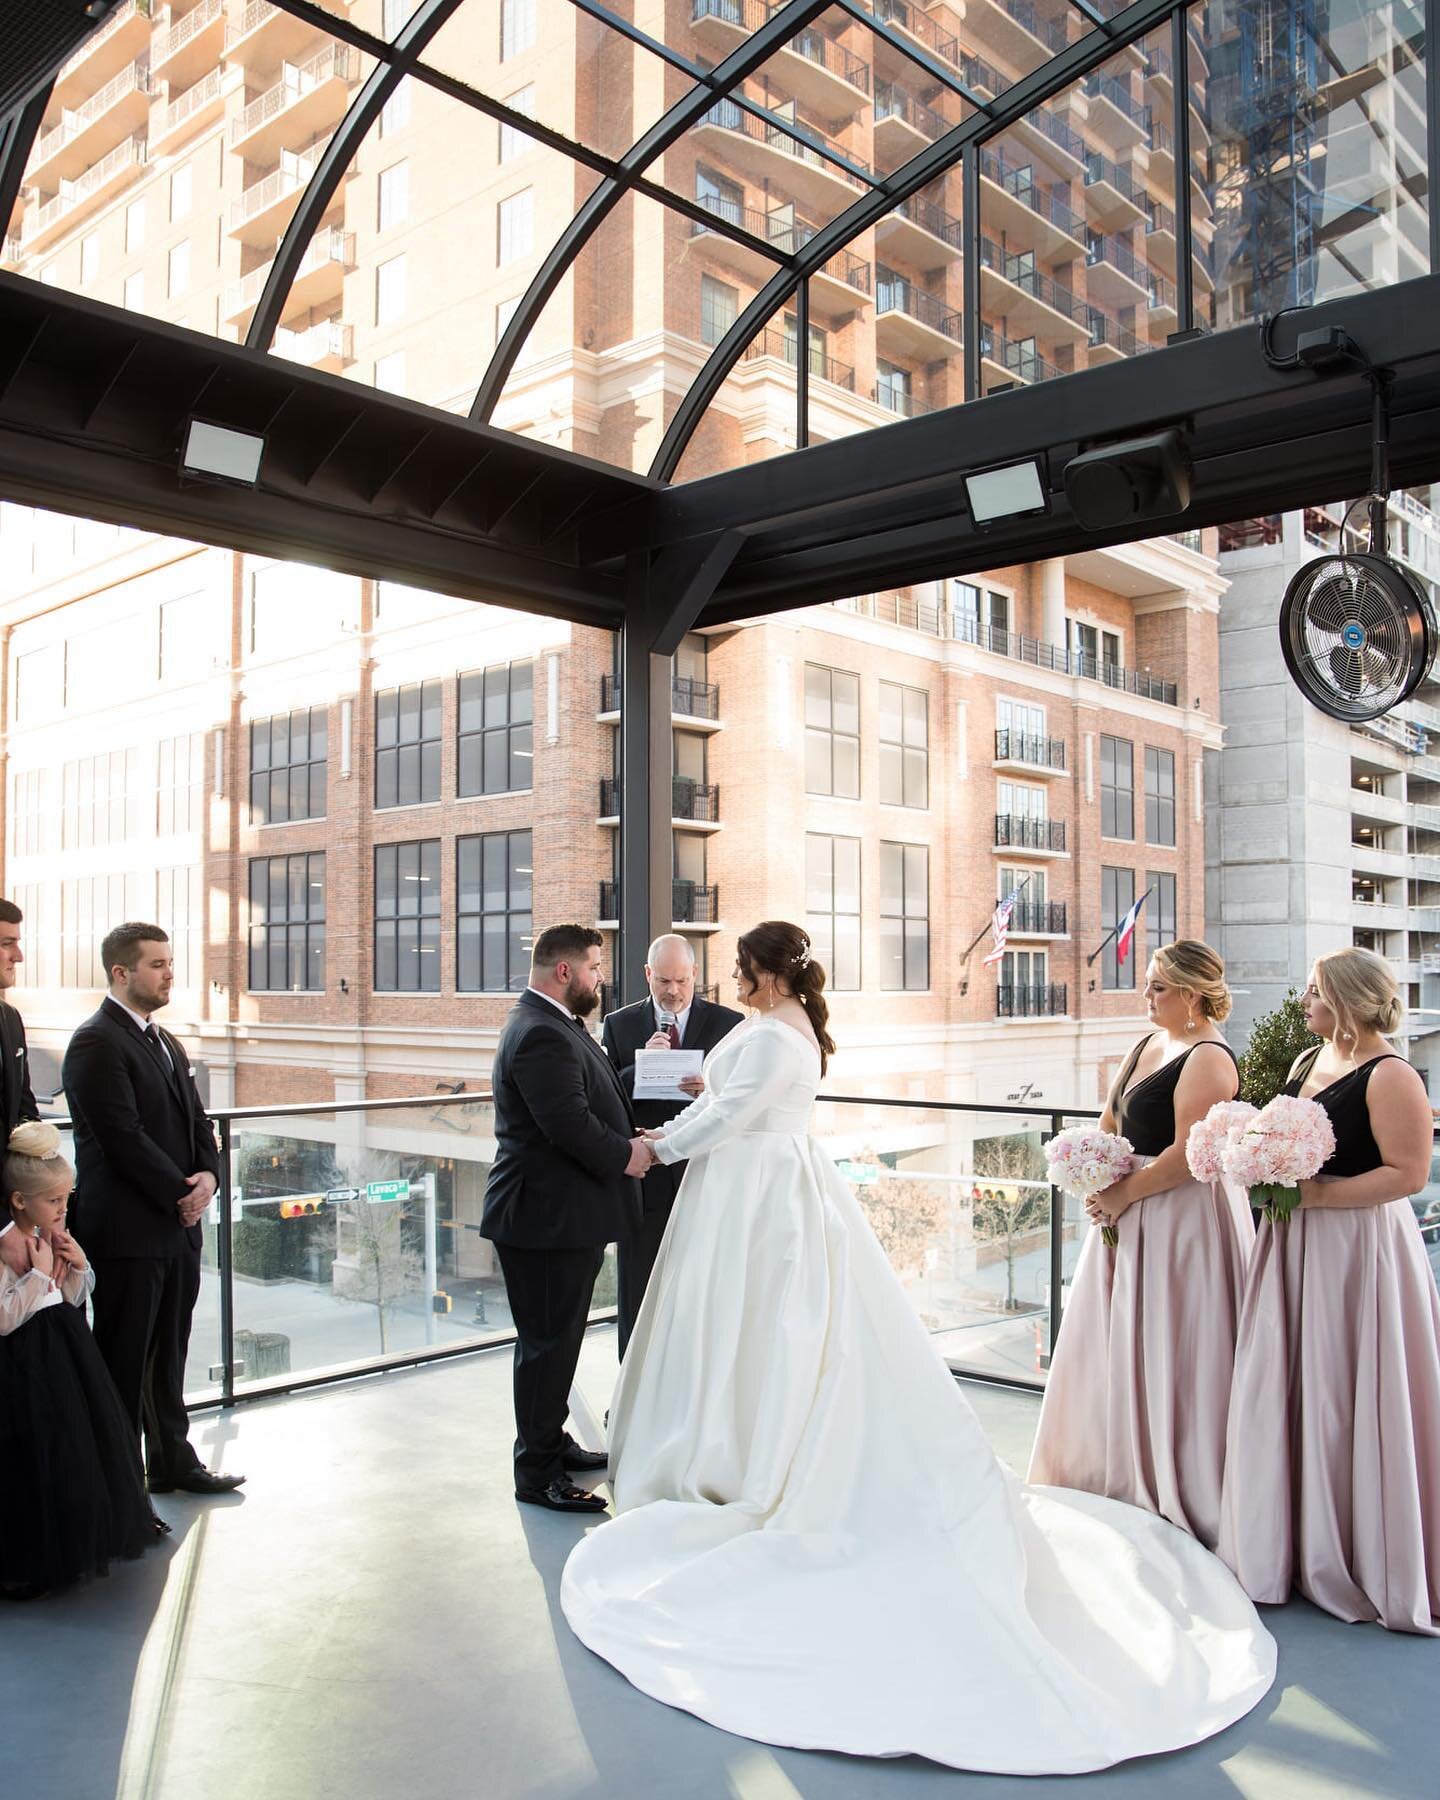 Another memorable ceremony for the books! So short, yet so sweet... And then came the real party-time in our Main Hall. 🎶🥂
&bull;
&bull;
&bull;
#rooftopwedding #downtownaustin #downtownbride #bridesofaustin #modernwedding